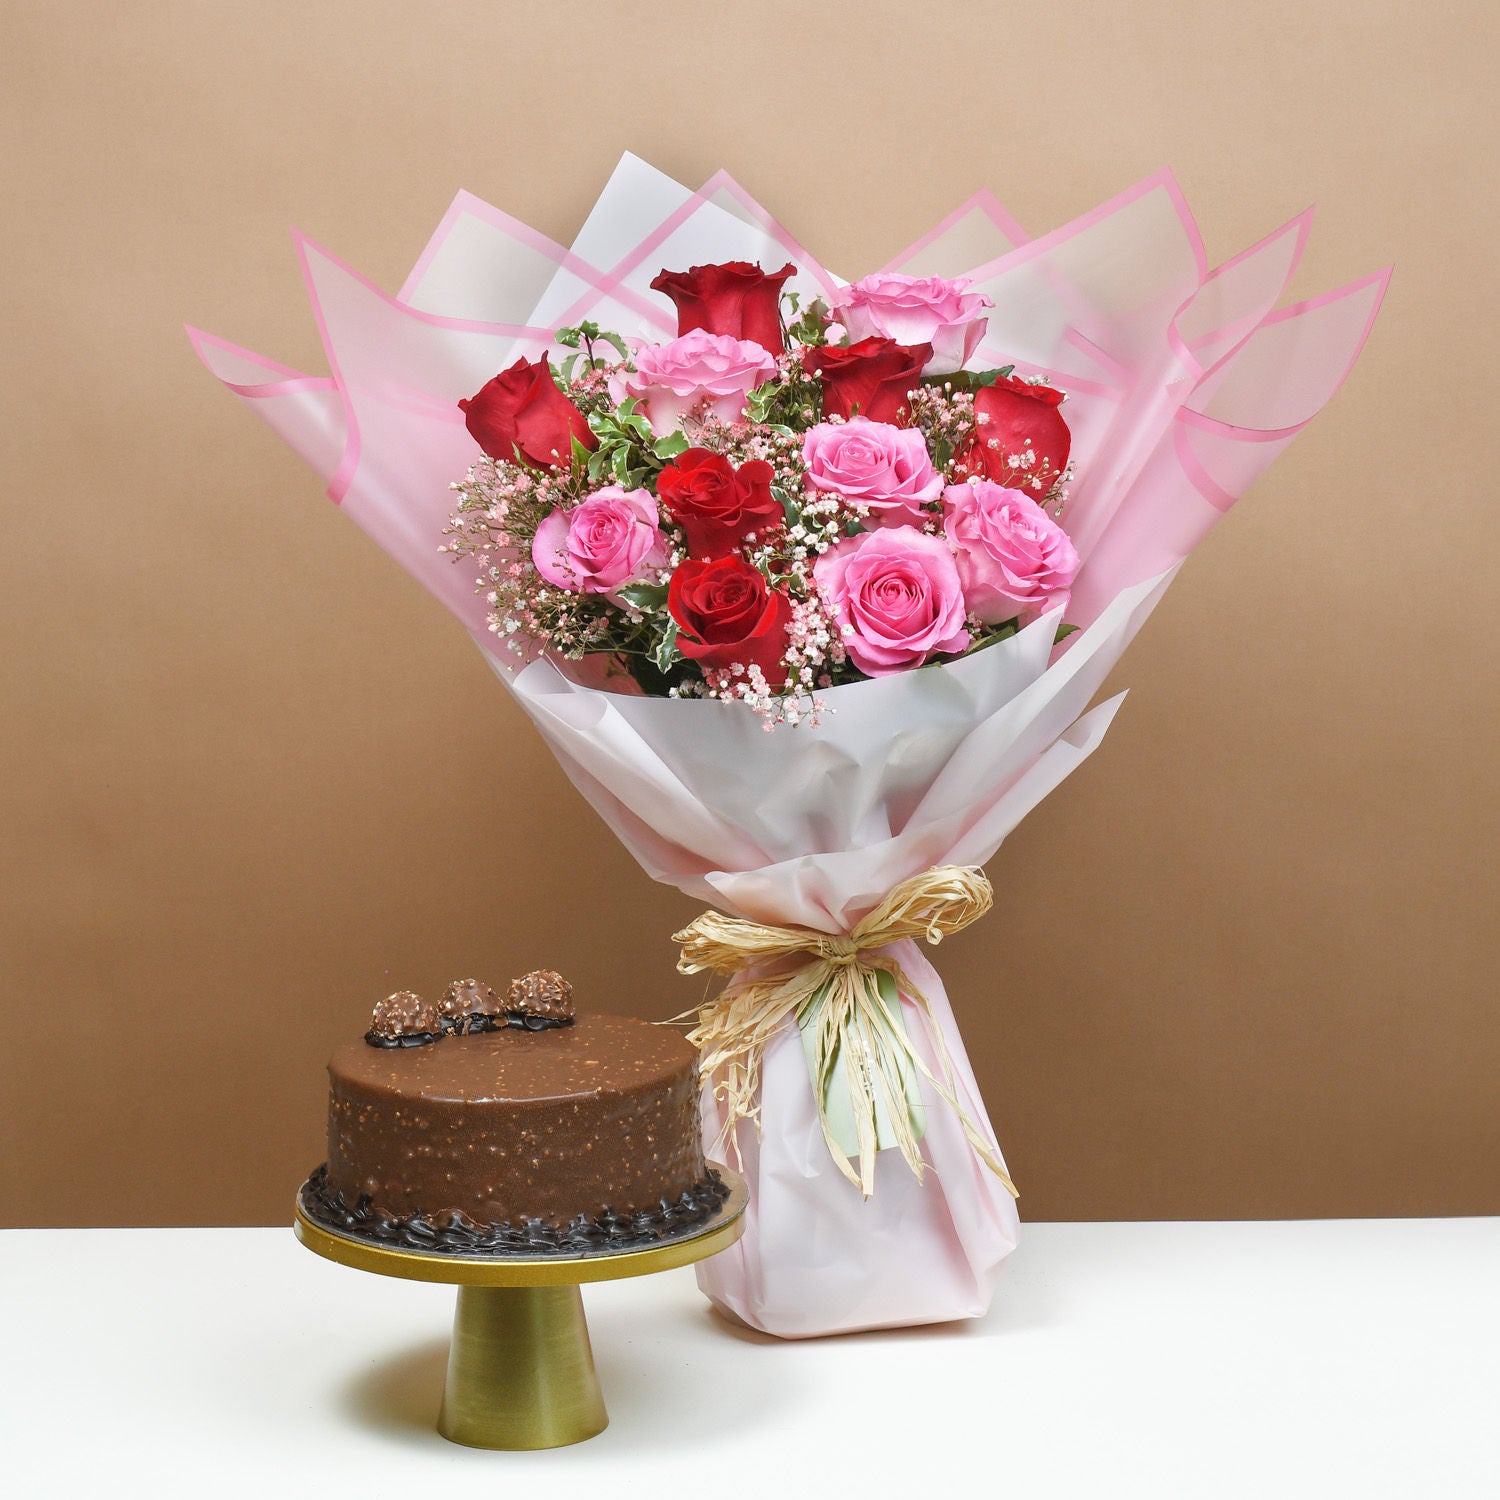 Romantic Rendezvous Roses and Chocolate Delight